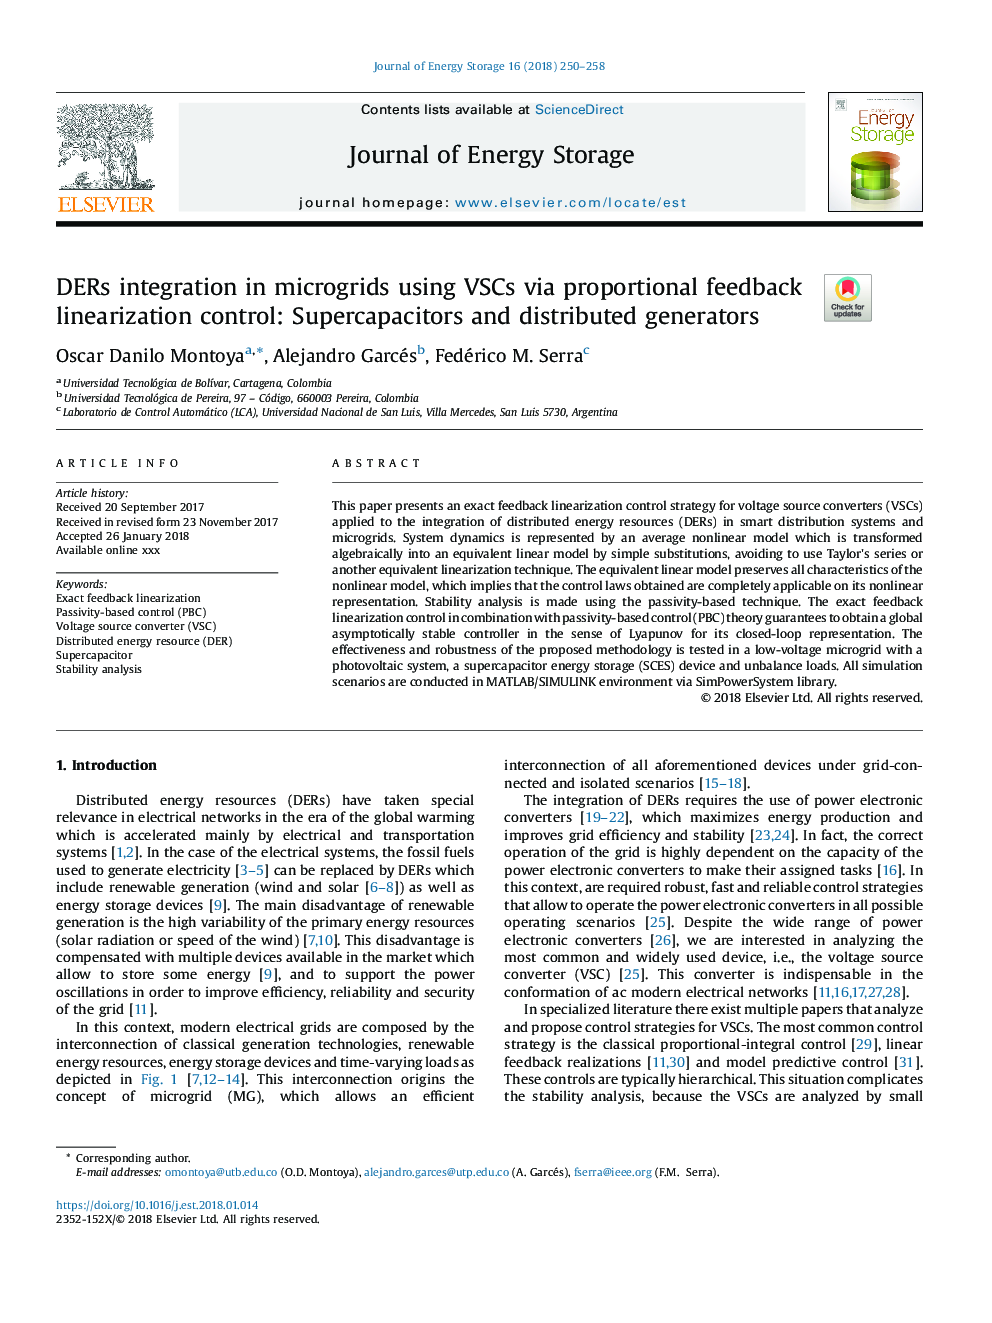 DERs integration in microgrids using VSCs via proportional feedback linearization control: Supercapacitors and distributed generators